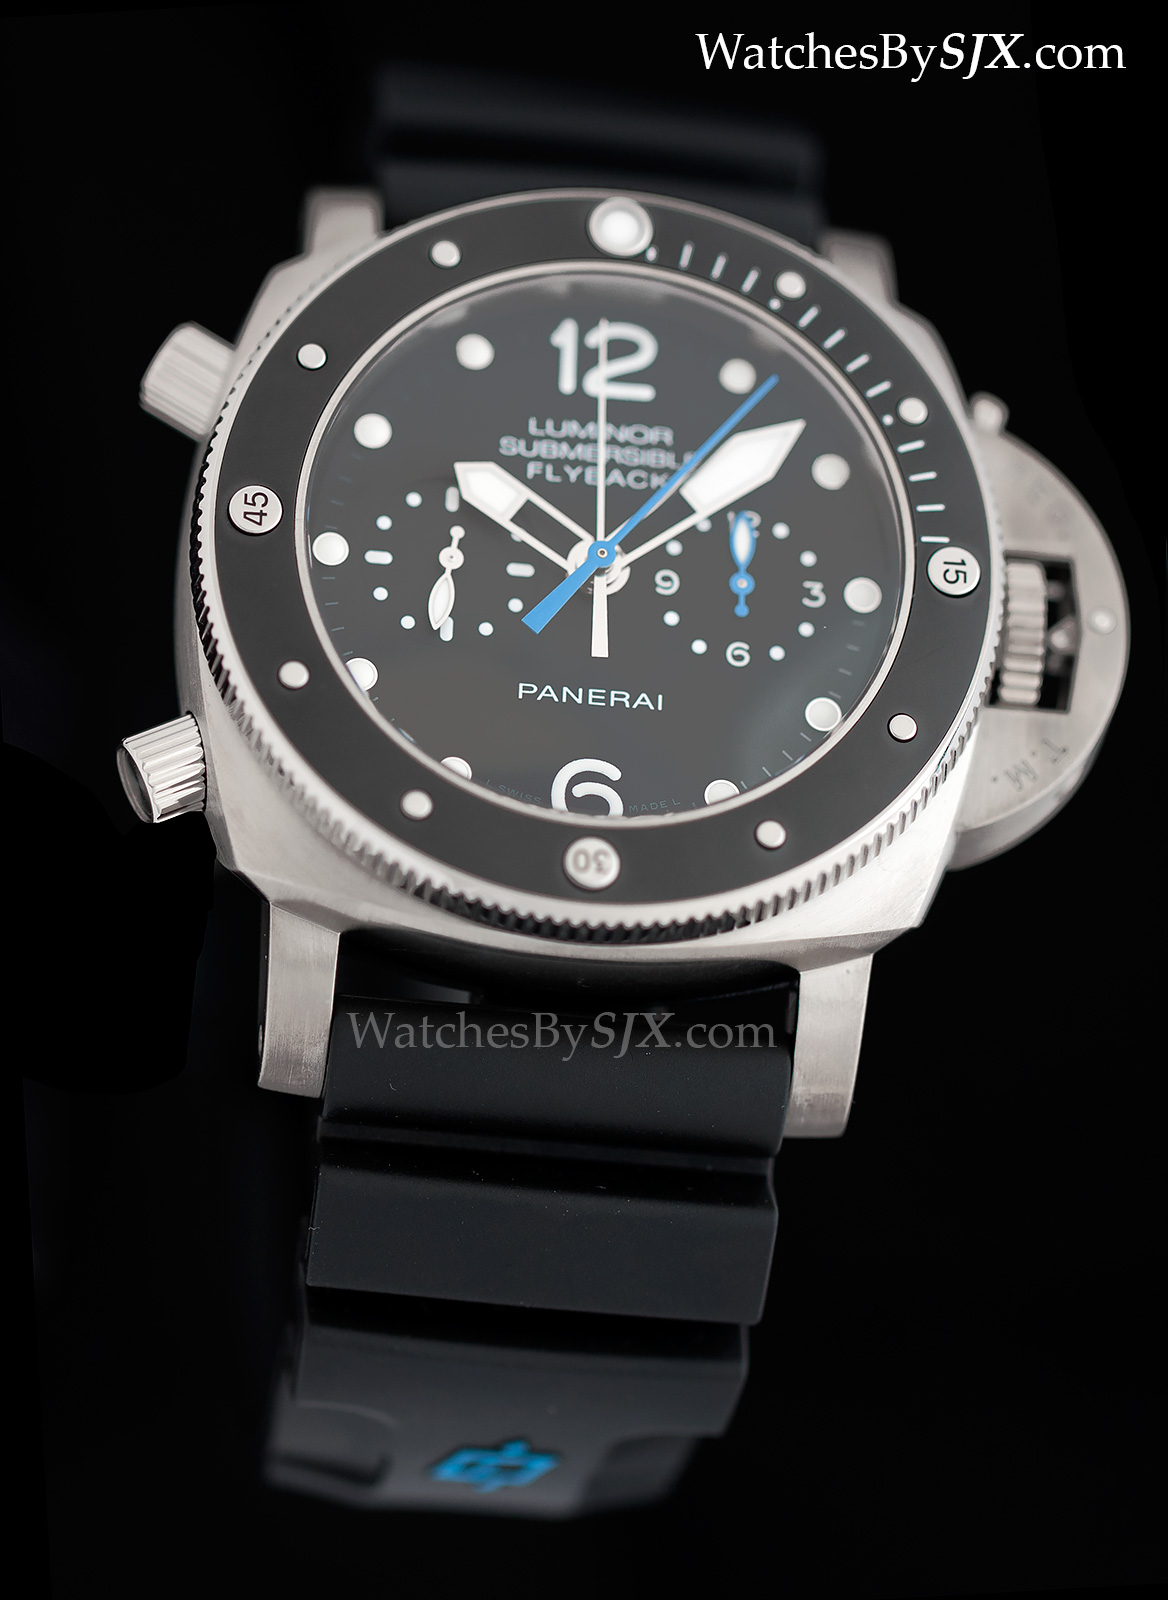 SIHH 2015 Roundup: Panerai – Everything You Need To Know, With Original ...